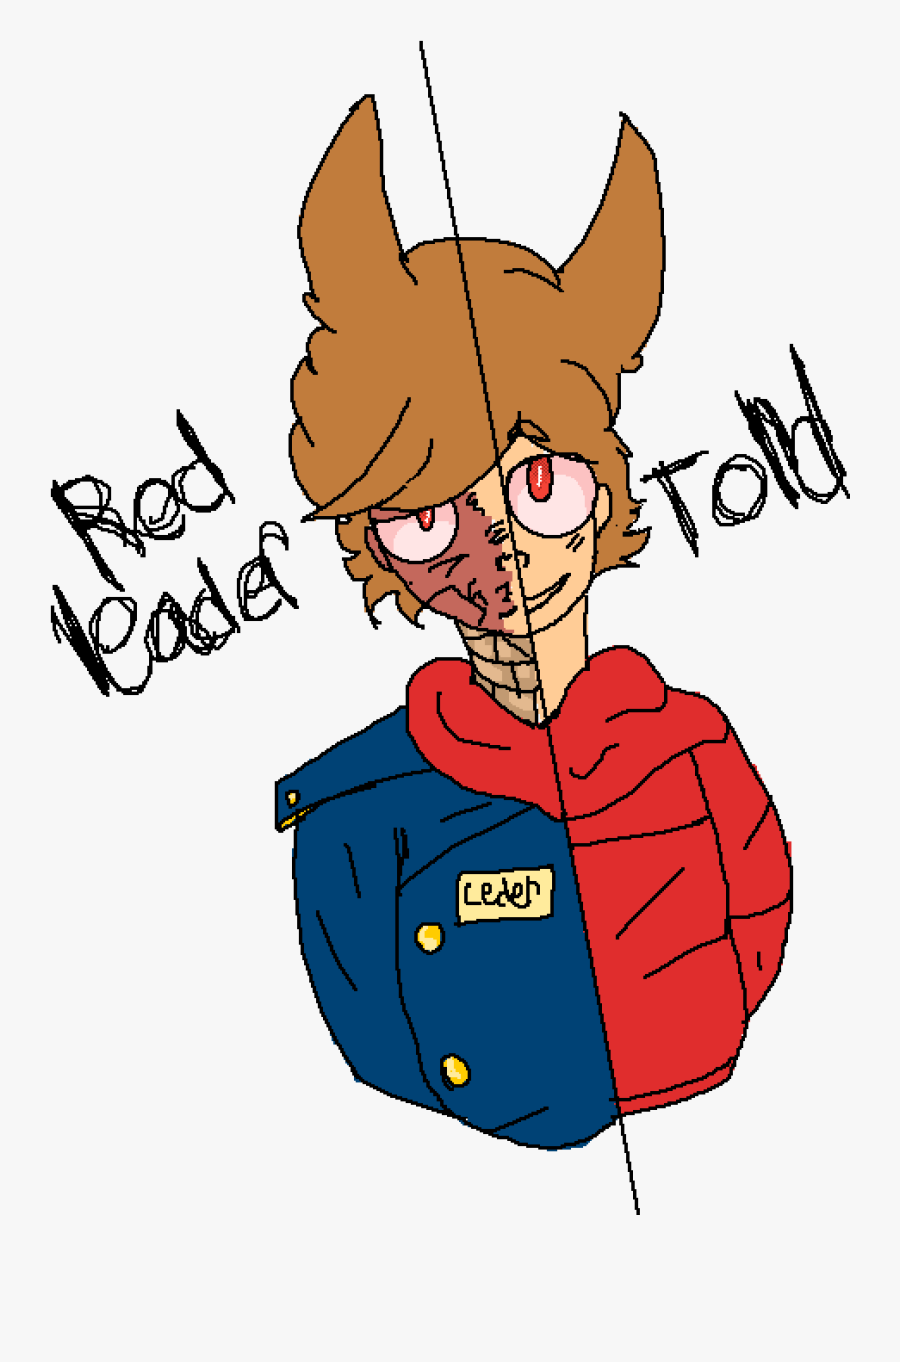 Tord/red Leader By Systemglitch - Tord Red Leader, Transparent Clipart